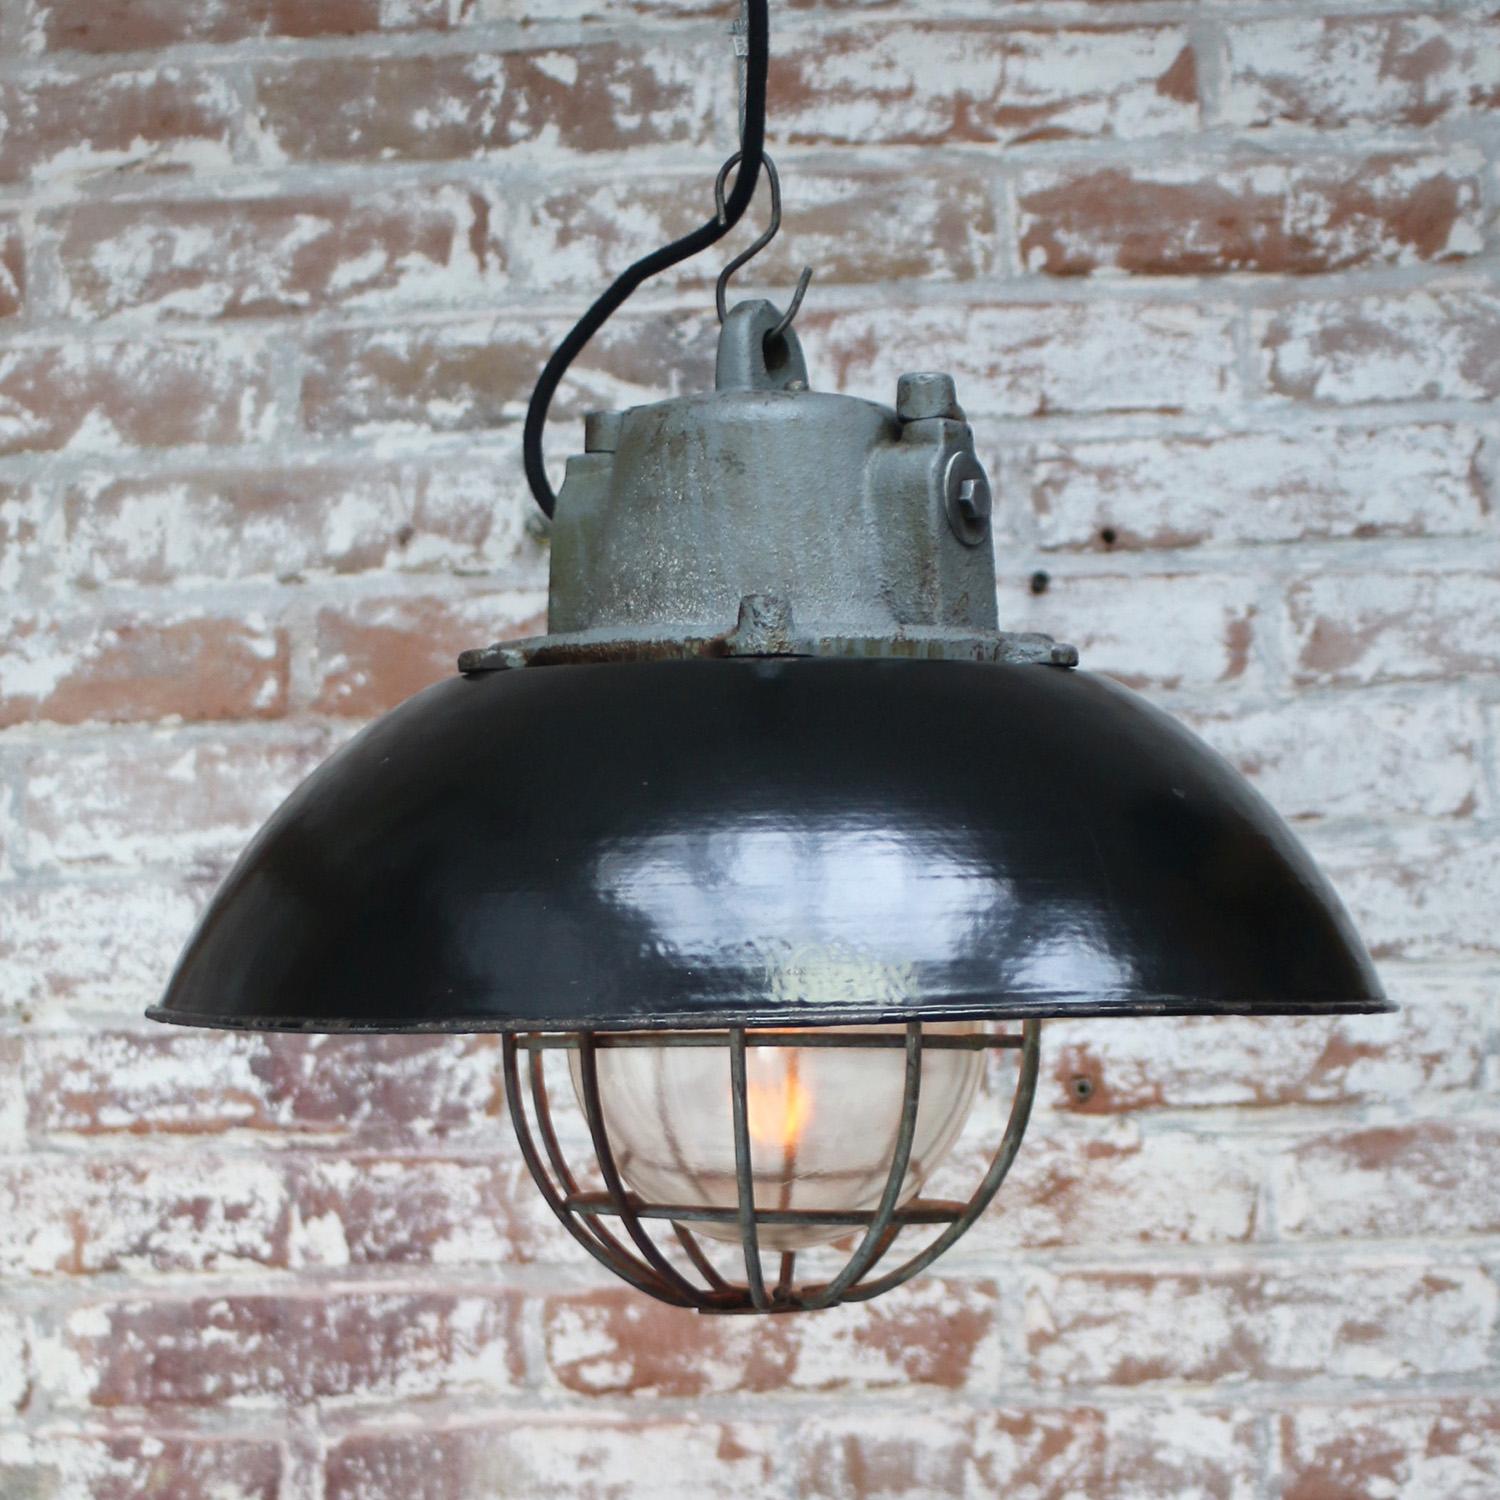 Black Enamel Vintage Industrial Cast Iron Clear Glass Pendant Light In Good Condition For Sale In Amsterdam, NL